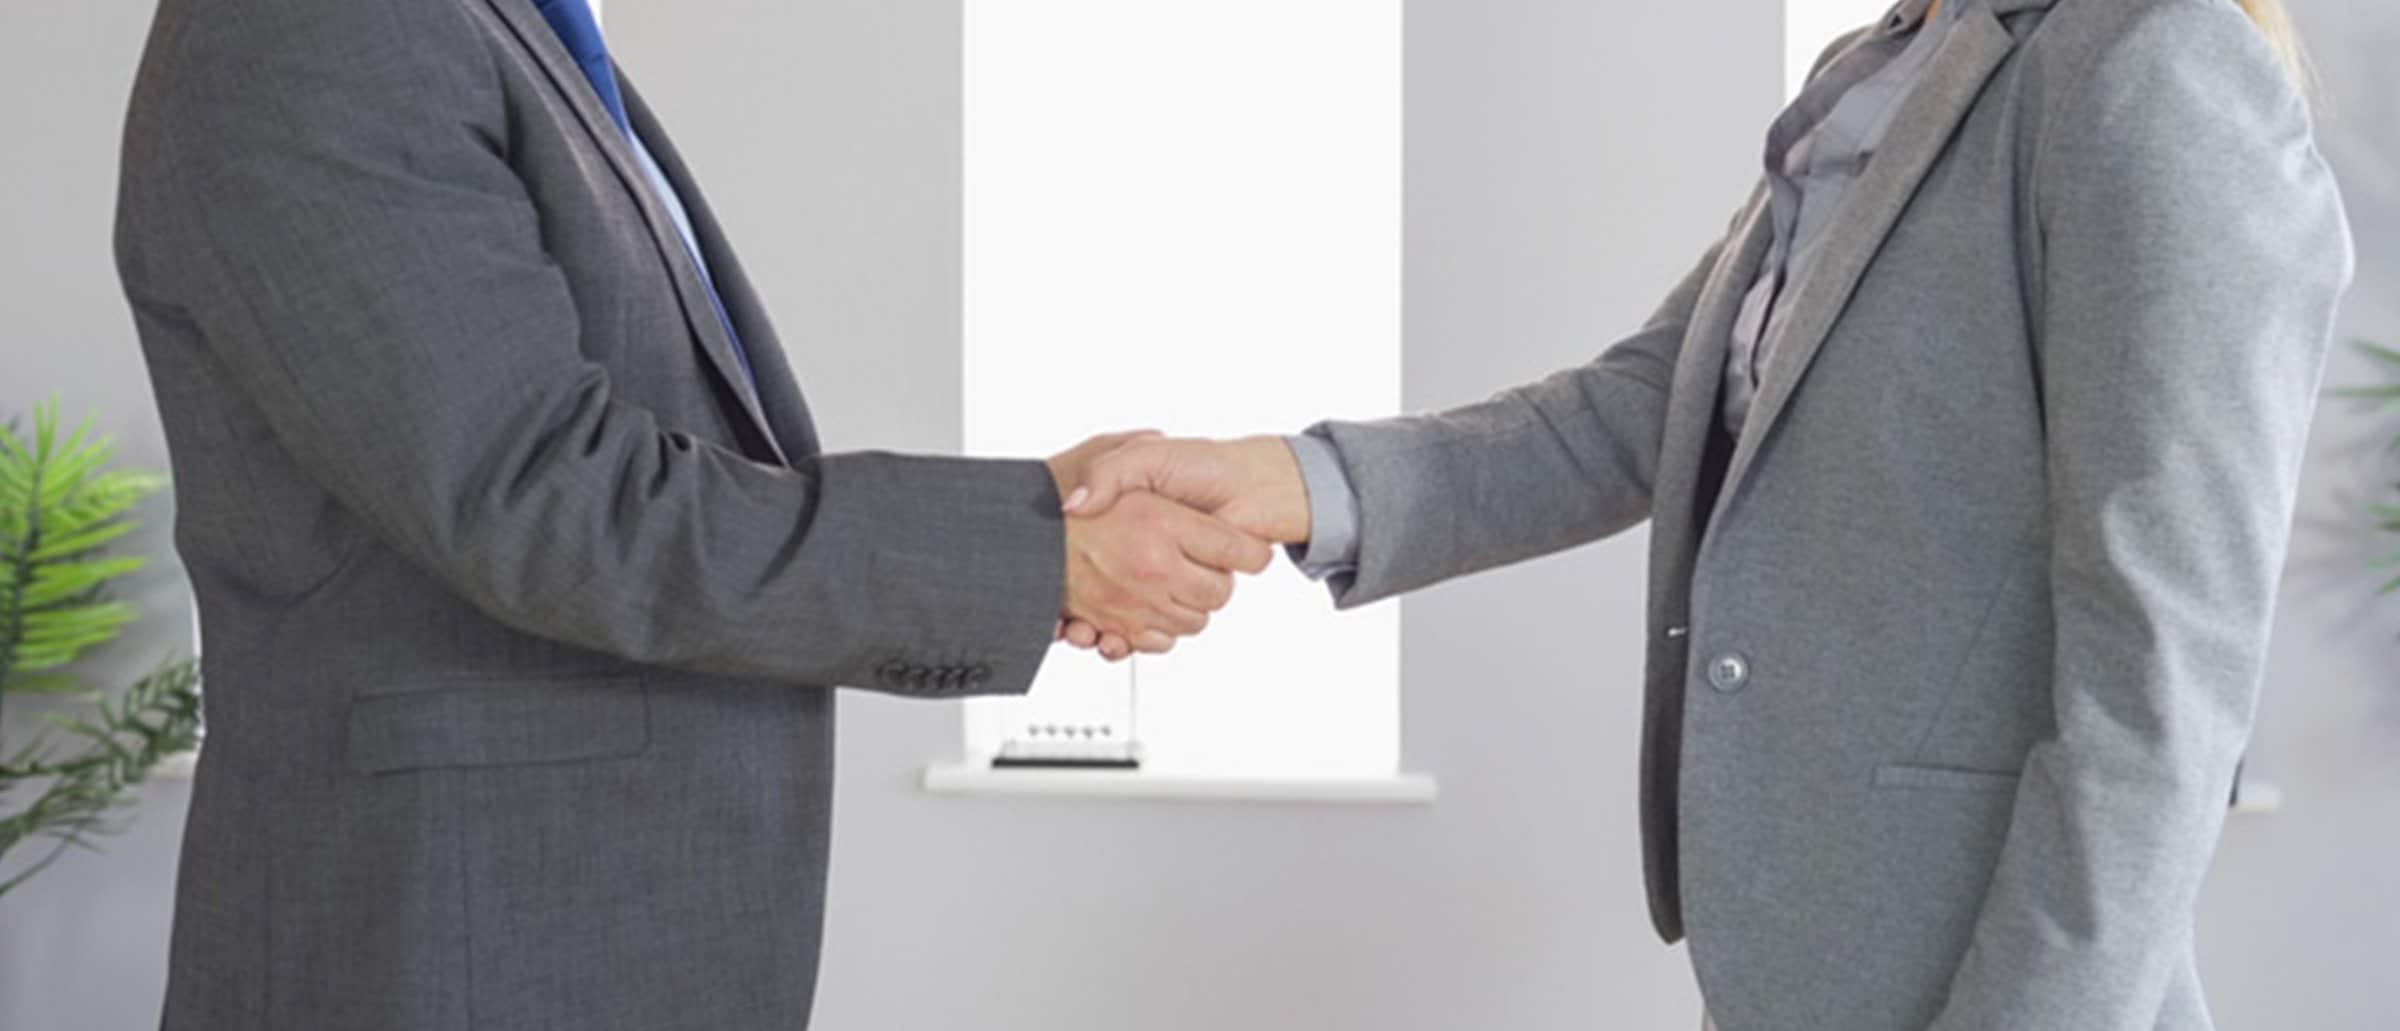 Businessman and businesswoman in grey suits standing and shaking hands